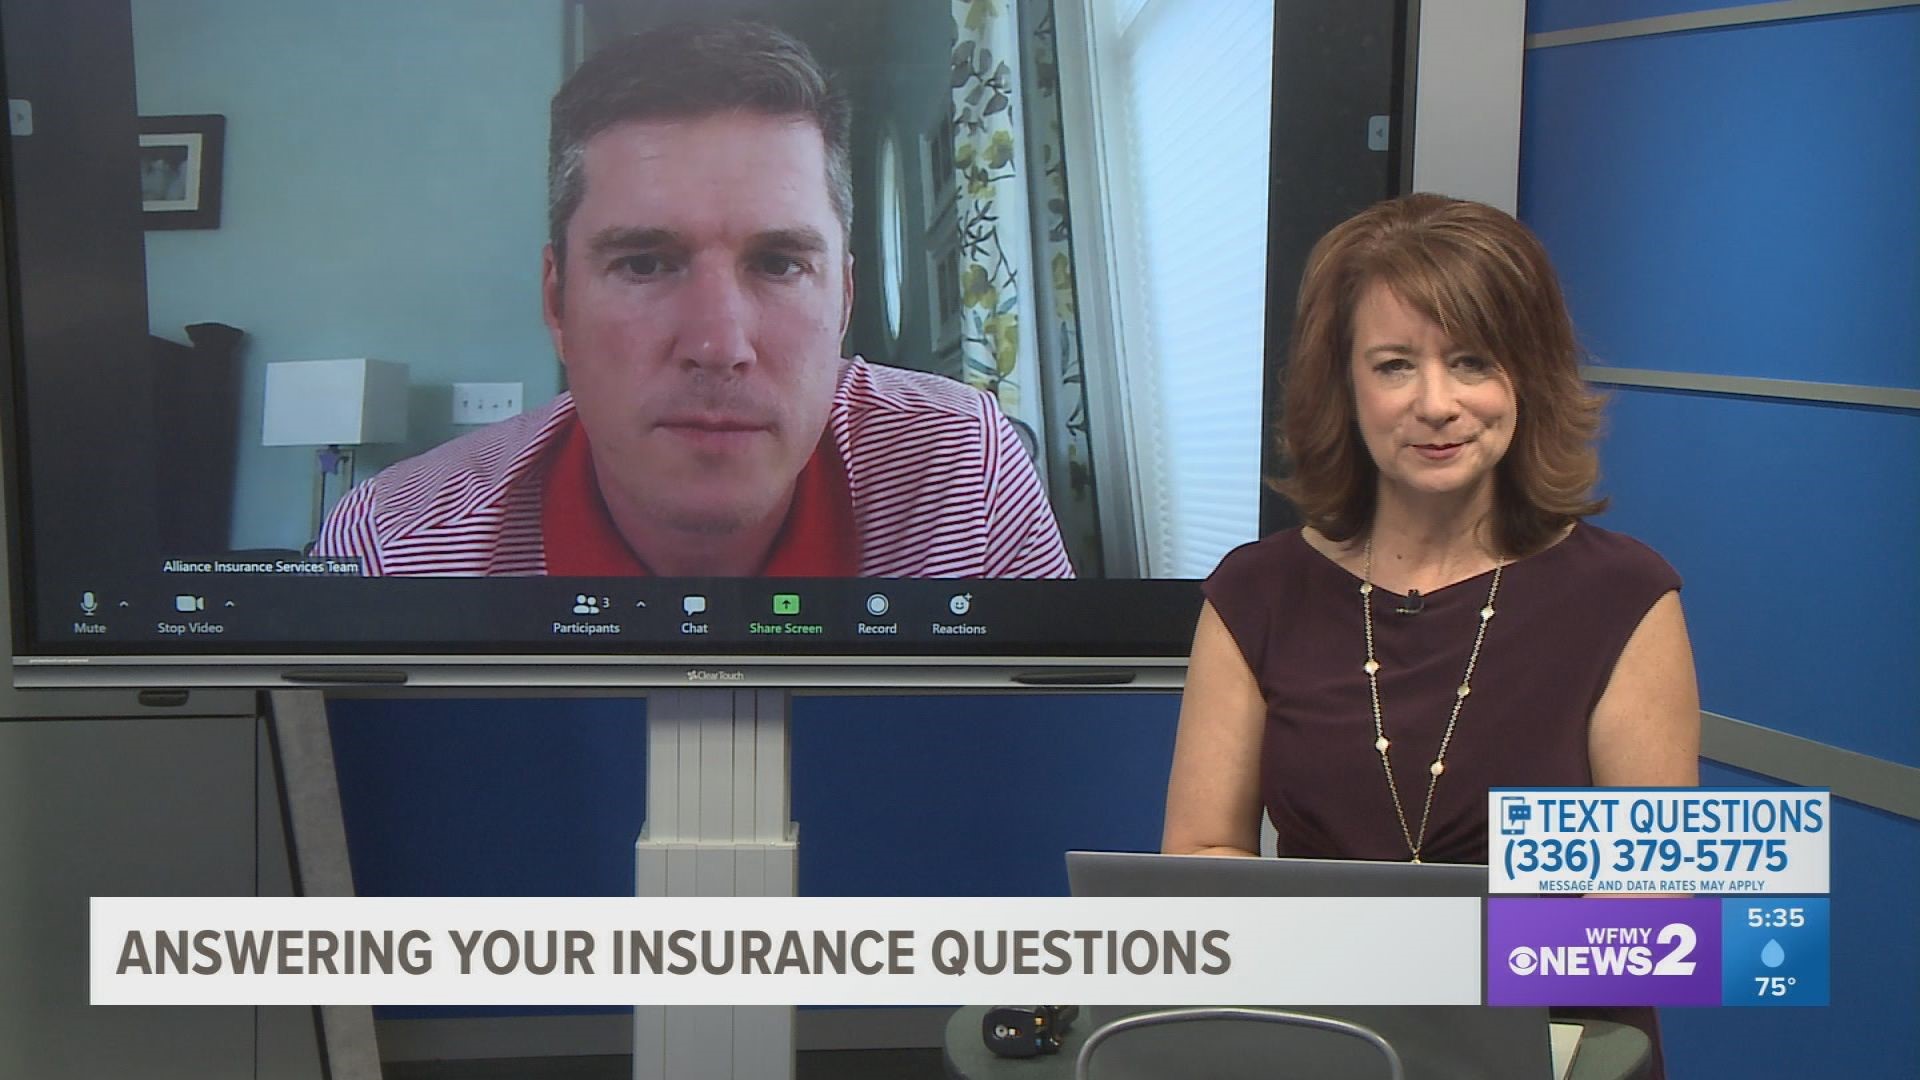 Christopher Cook with Alliance Insurance joins us to answer your questions about your insurance questions.